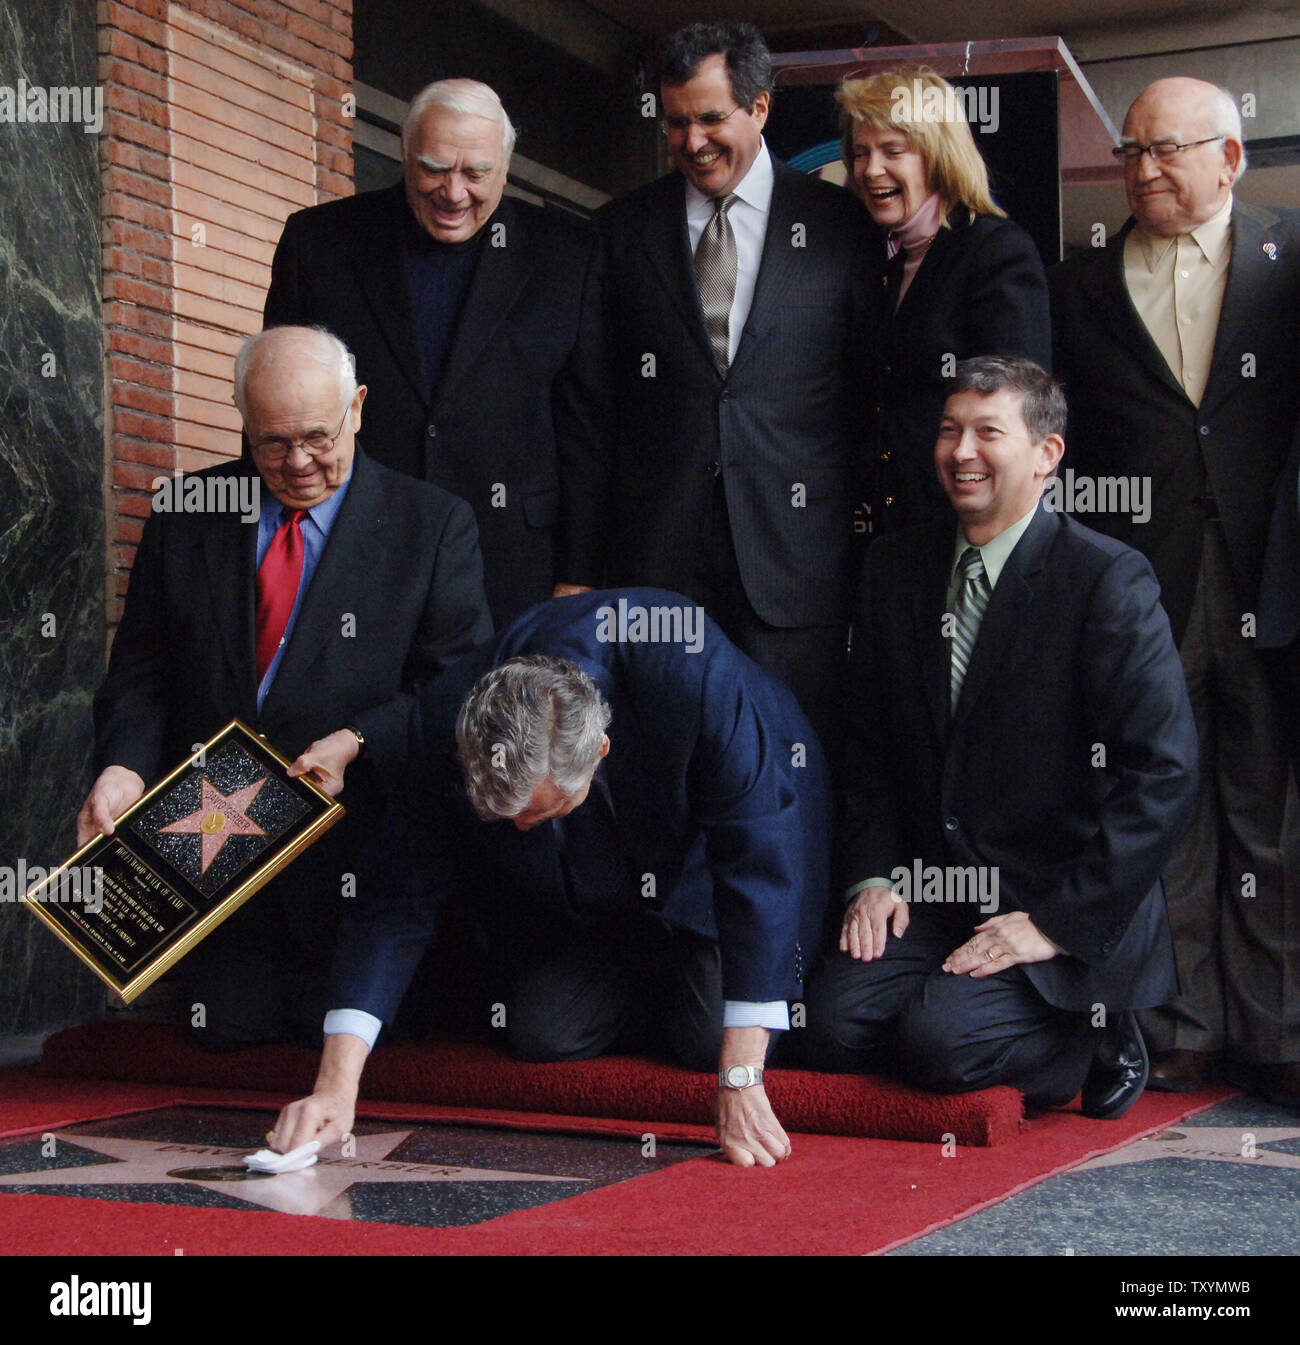 David Gerber (C), an Emmy and Peabody Award winner, facetiously cleans his star after it was unveiled during a ceremony honoring the television industry veteran with the 2,326th star on the Hollywood Walk of Fame in Los Angeles on January 11, 2007. Looking on are Ernest Borgnine, Peter Chernin, Laraine Stephens and Ed Asner (L-R, rear). Gerber's accomplishments include such classic television projects as 'Batman', 'Room 222', 'thirtysomething', 'Police Story', 'Police Woman', the 'George Washington' miniseries, 'The Lindbergh Kidnapping Case', 'In the Heat of the Night' and 'The Lost Battalion Stock Photo